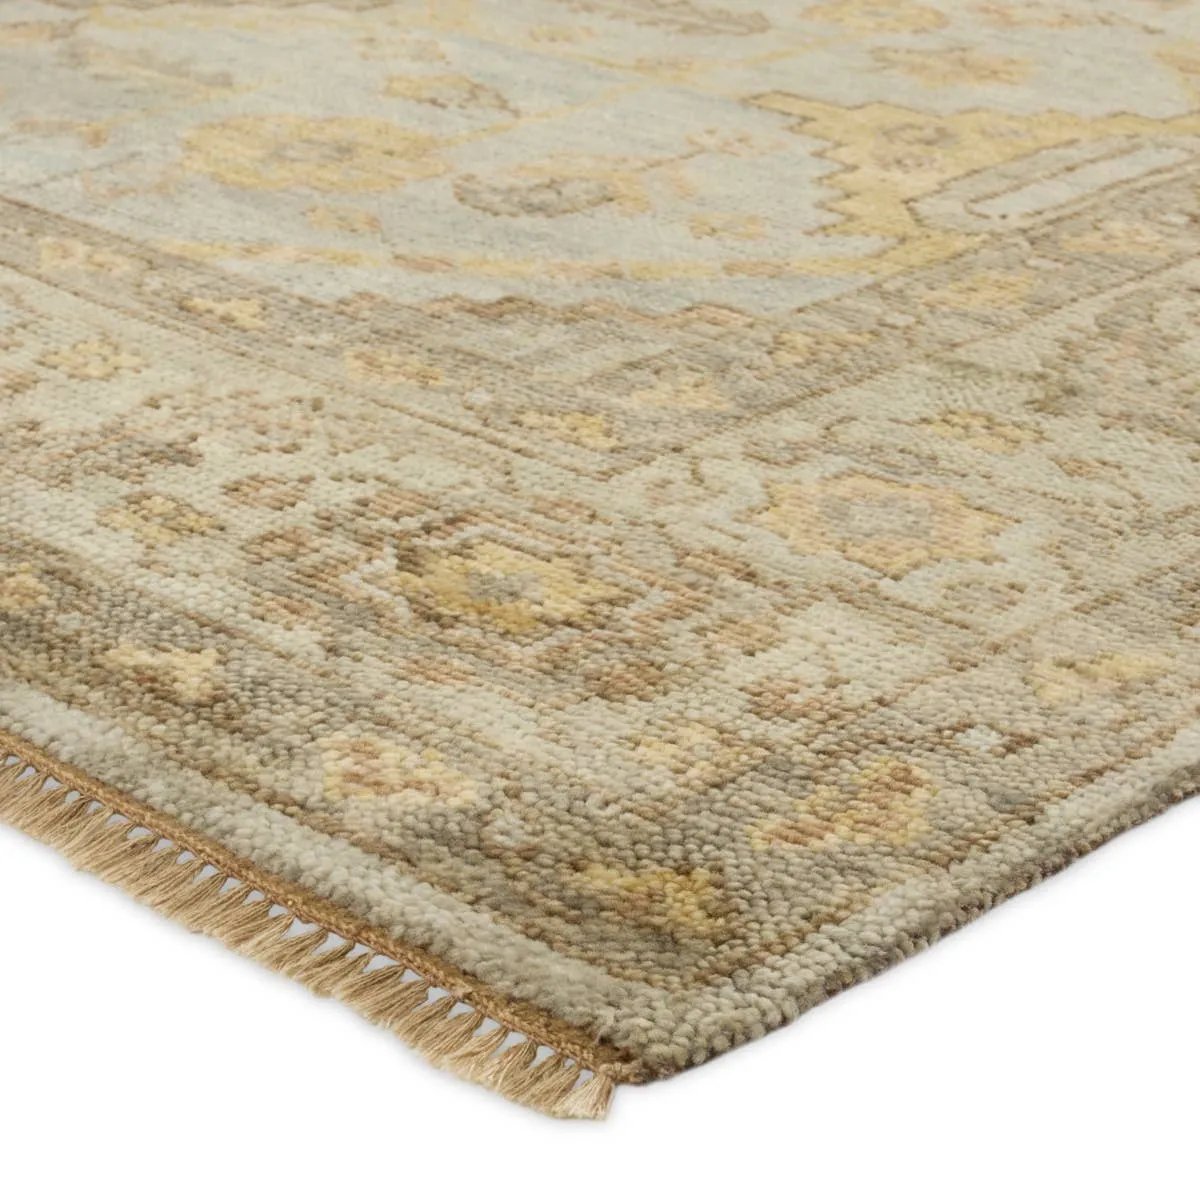 The Rhapsody Gehenna features heirloom-quality designs of stunningly abrashed Old World patterns. The Gehenna area rug boasts a beautifully distressed medallion motif with a decorative border and floral detailing. The gray and brown tones are accented with light blue, sage, beige, and yellow hues for added depth and intrigue. Amethyst Home provides interior design, new home construction design consulting, vintage area rugs, and lighting in the Alpharetta metro area.